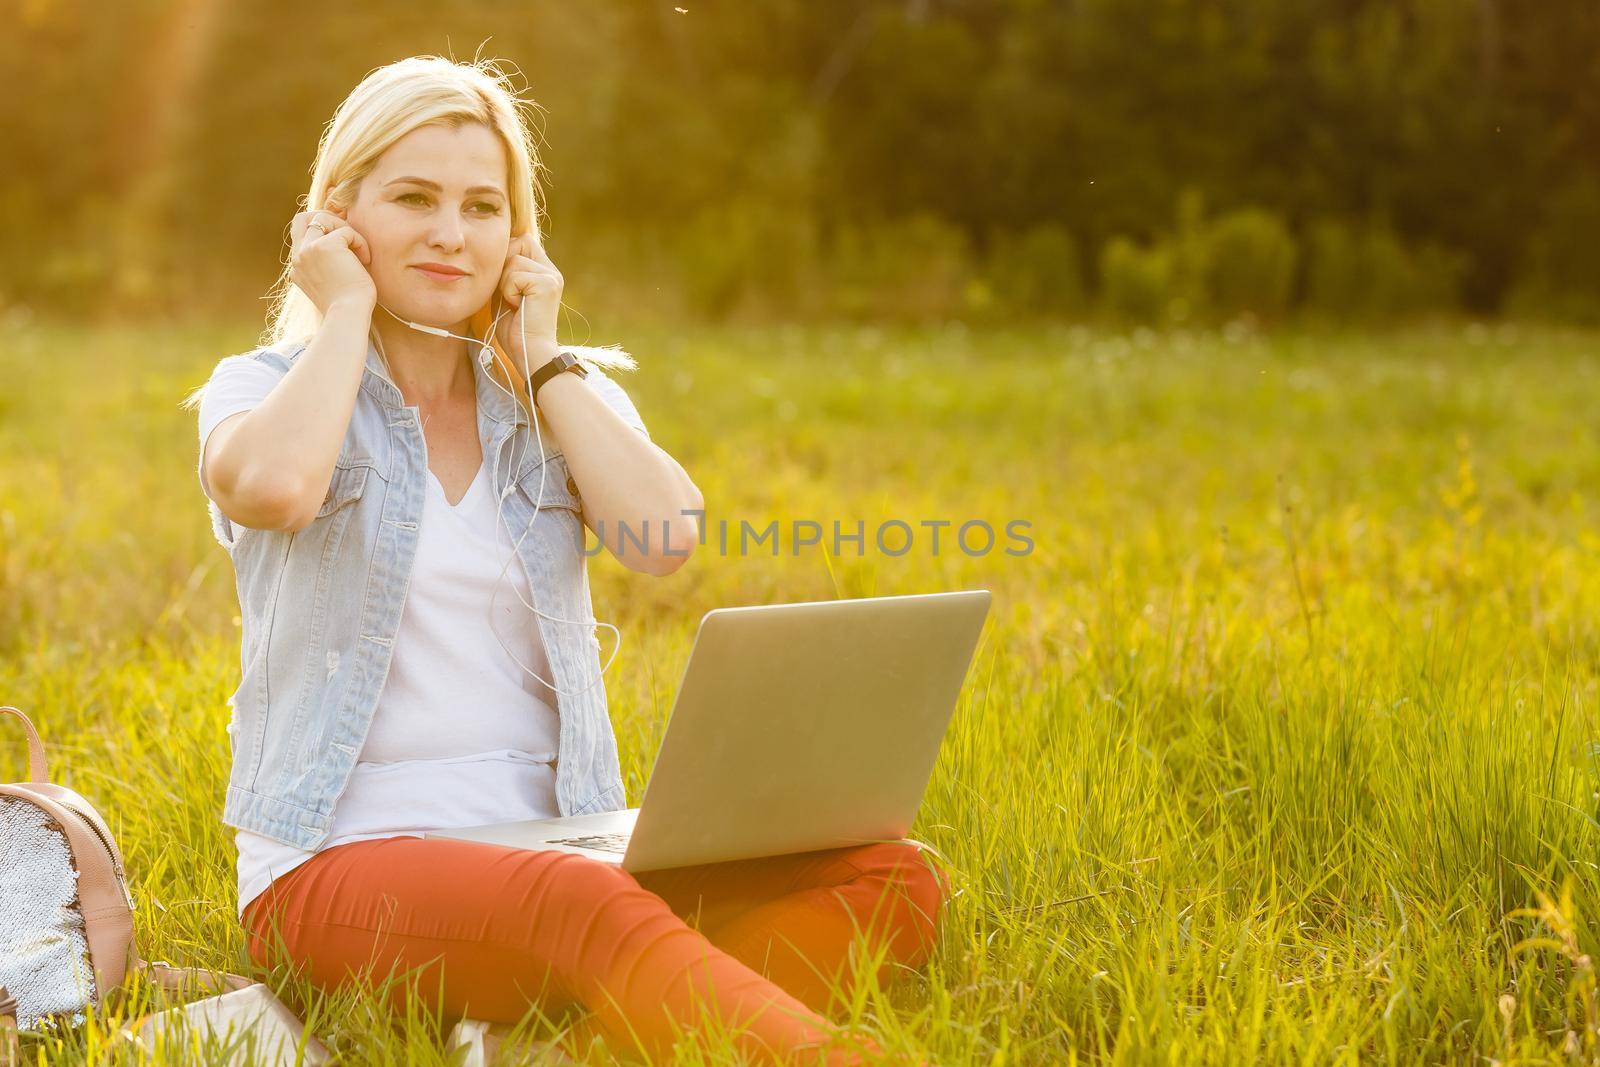 Euphoric woman searching job with a laptop in an urban park in summer. by Andelov13